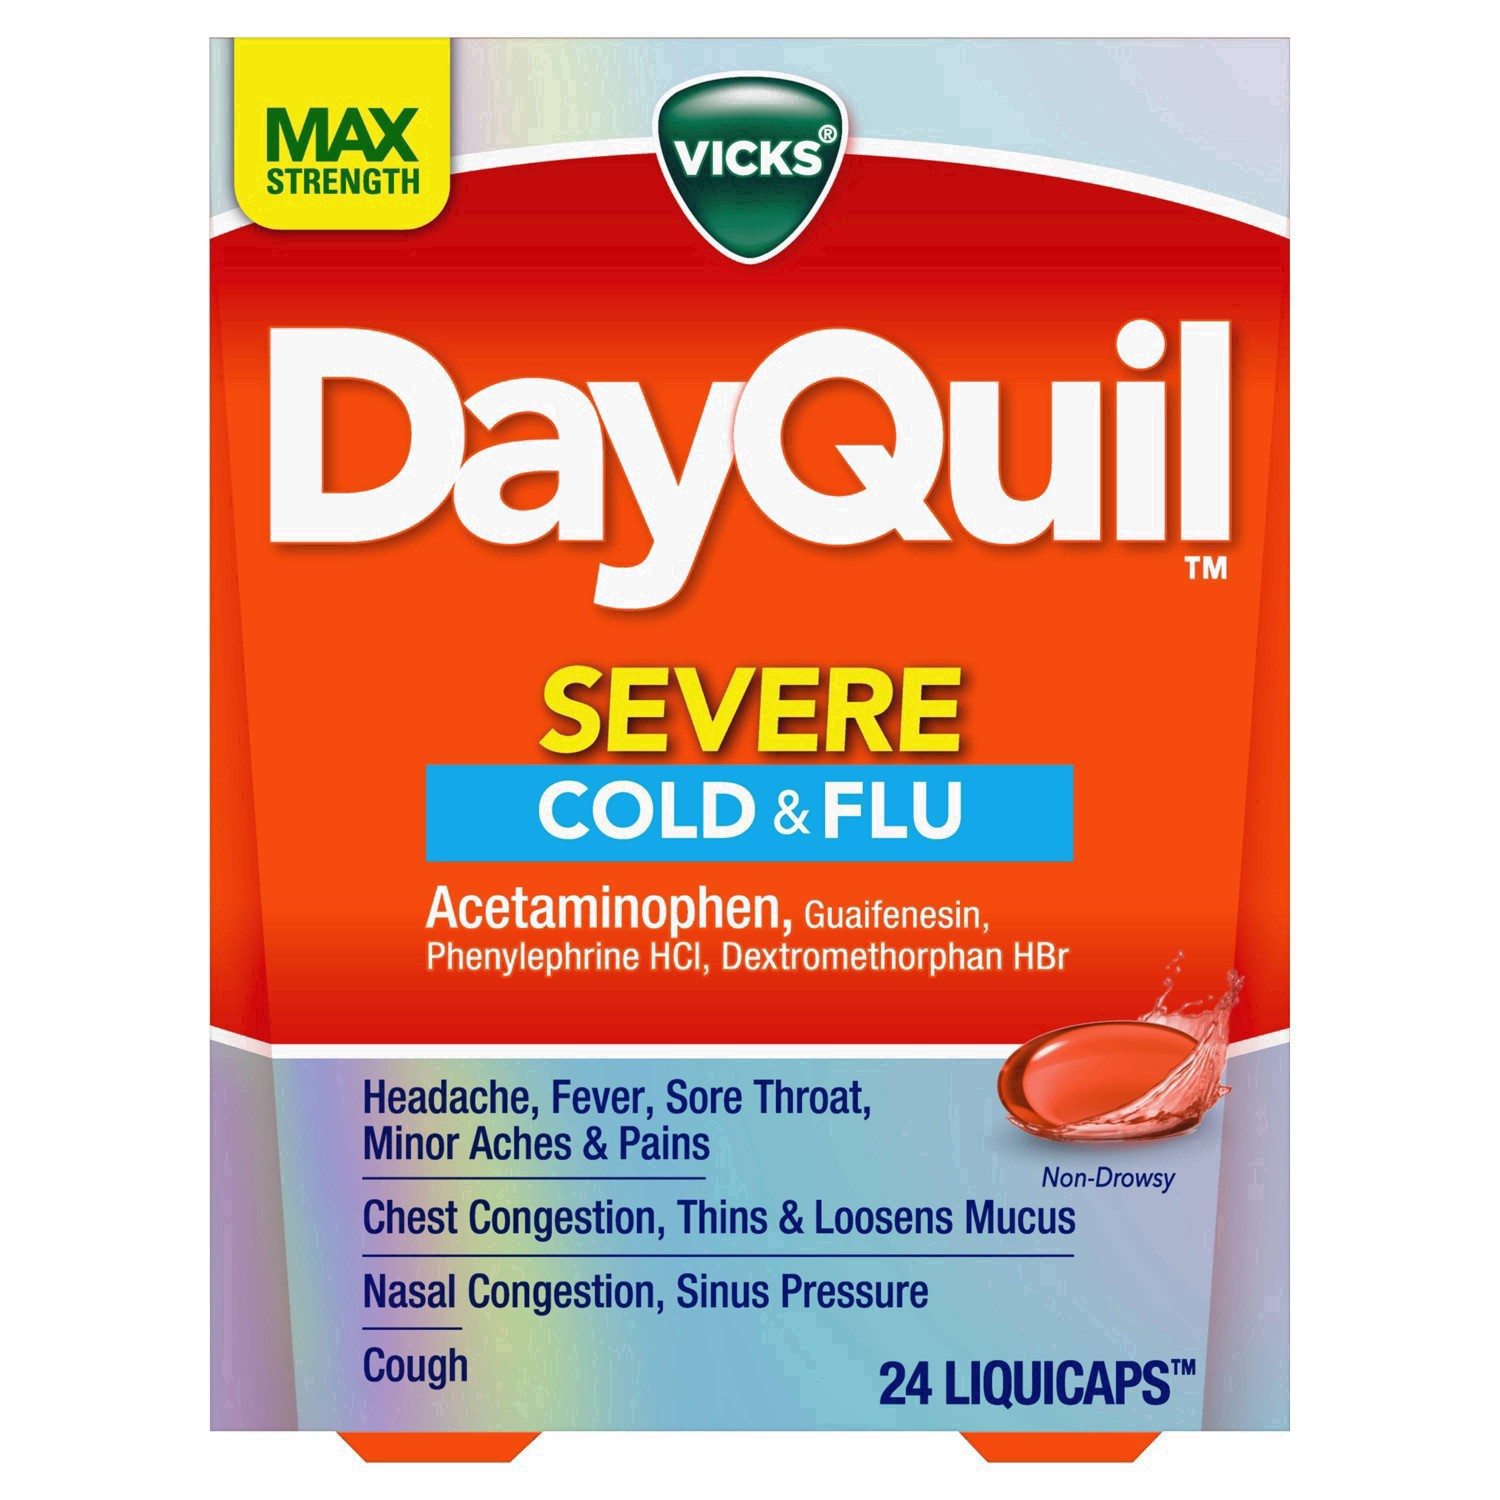 slide 2 of 46, Vicks DayQuil SEVERE Cold & Flu Medicine, Maximum Strength 9-Symptom Non-Drowsy Daytime Relief for Headache, Fever, Sore Throat, Minor Aches and Pains, Chest Congestion, Stuffy Nose, Nasal Congestion, Sinus Pressure, and Cough, 24 Liquicaps, 24 ct